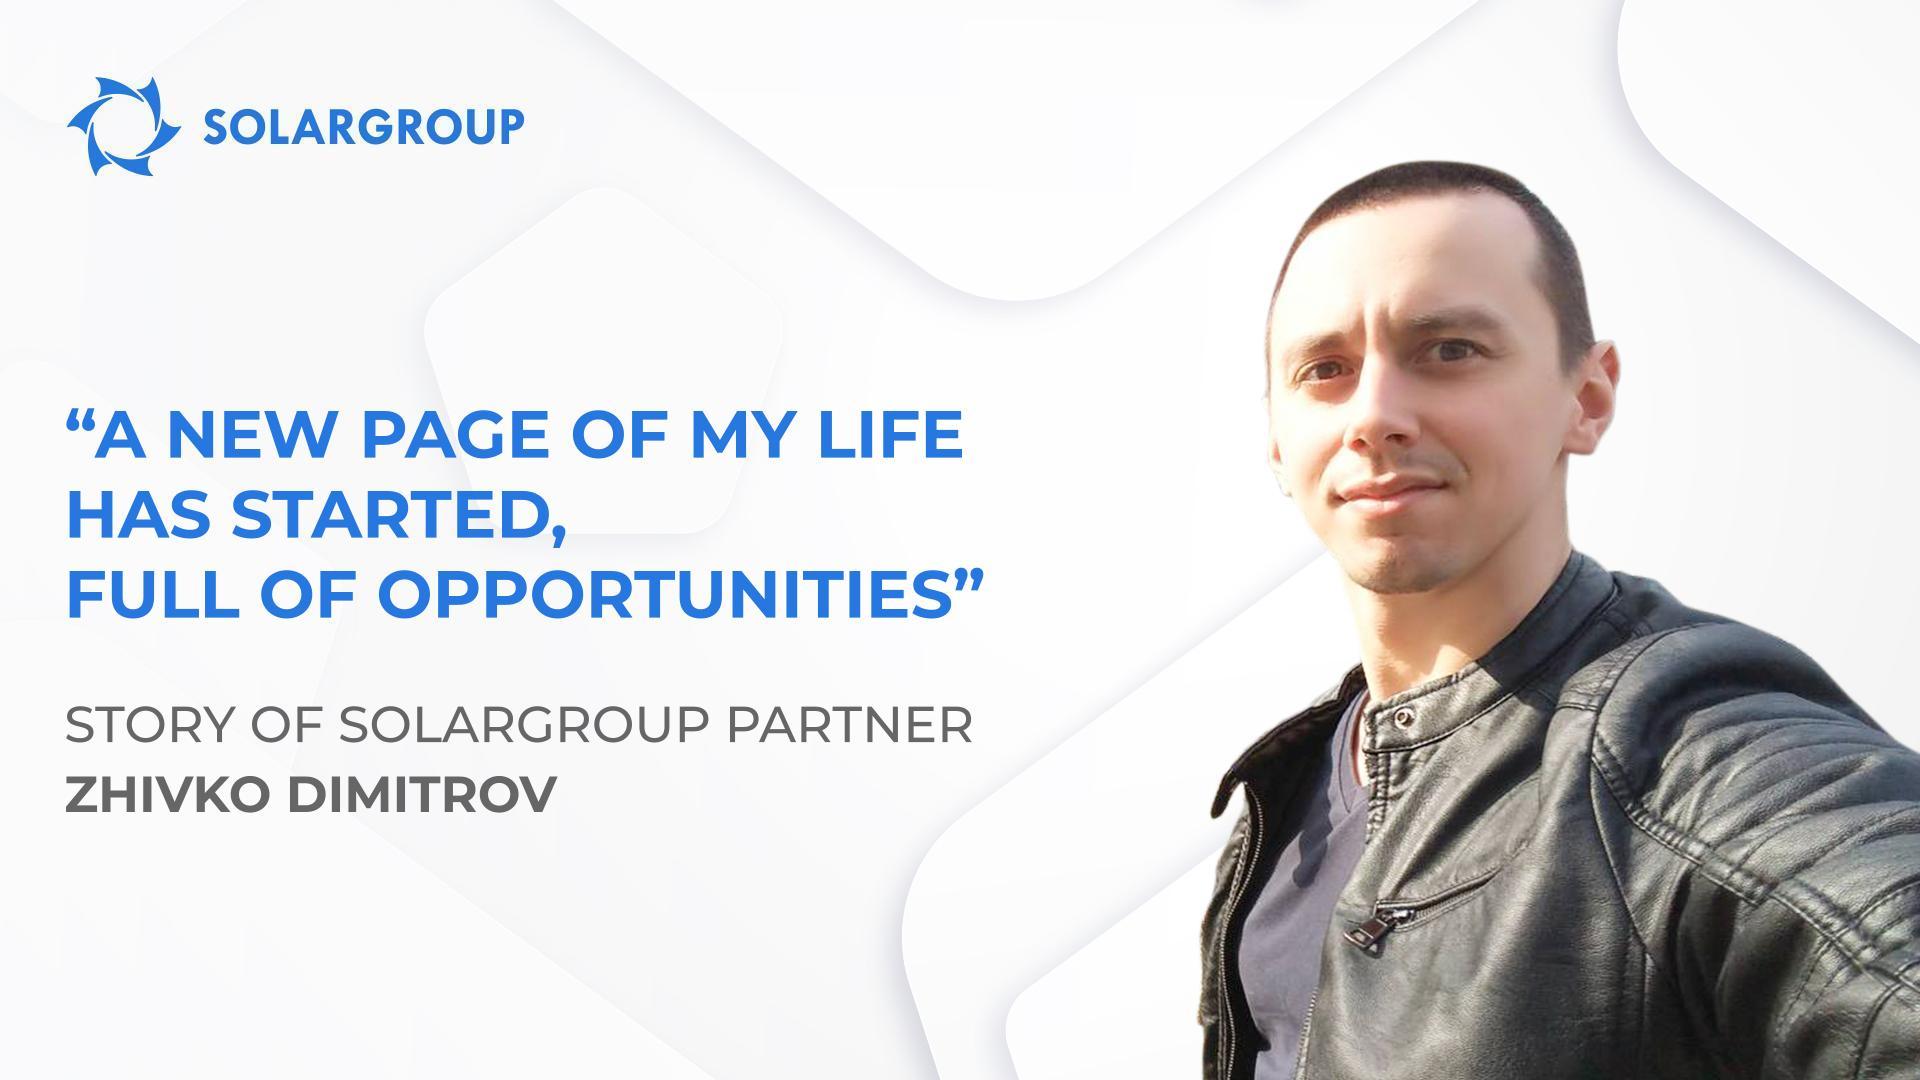 SOLARGROUP has changed my outlook and way of life | Story of partner Zhivko Dimitrov